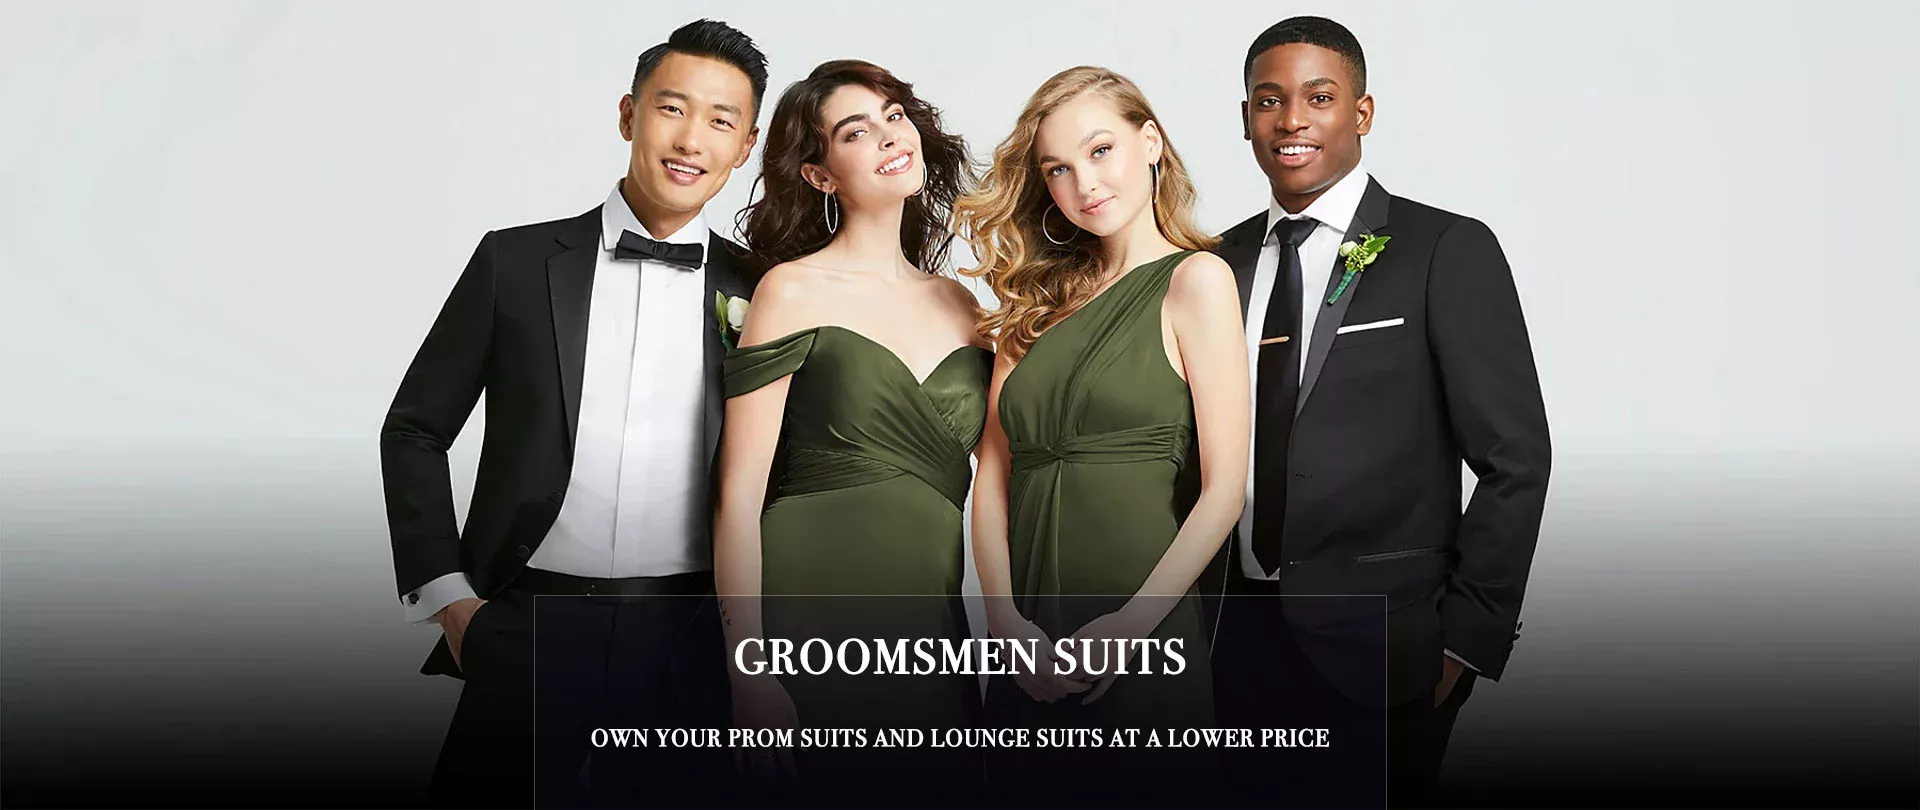 Are you looking for wedding suits for men in cheap price with custom made service? Shop the collection of groom tuxedos & suits for weddings from Bradymensuit